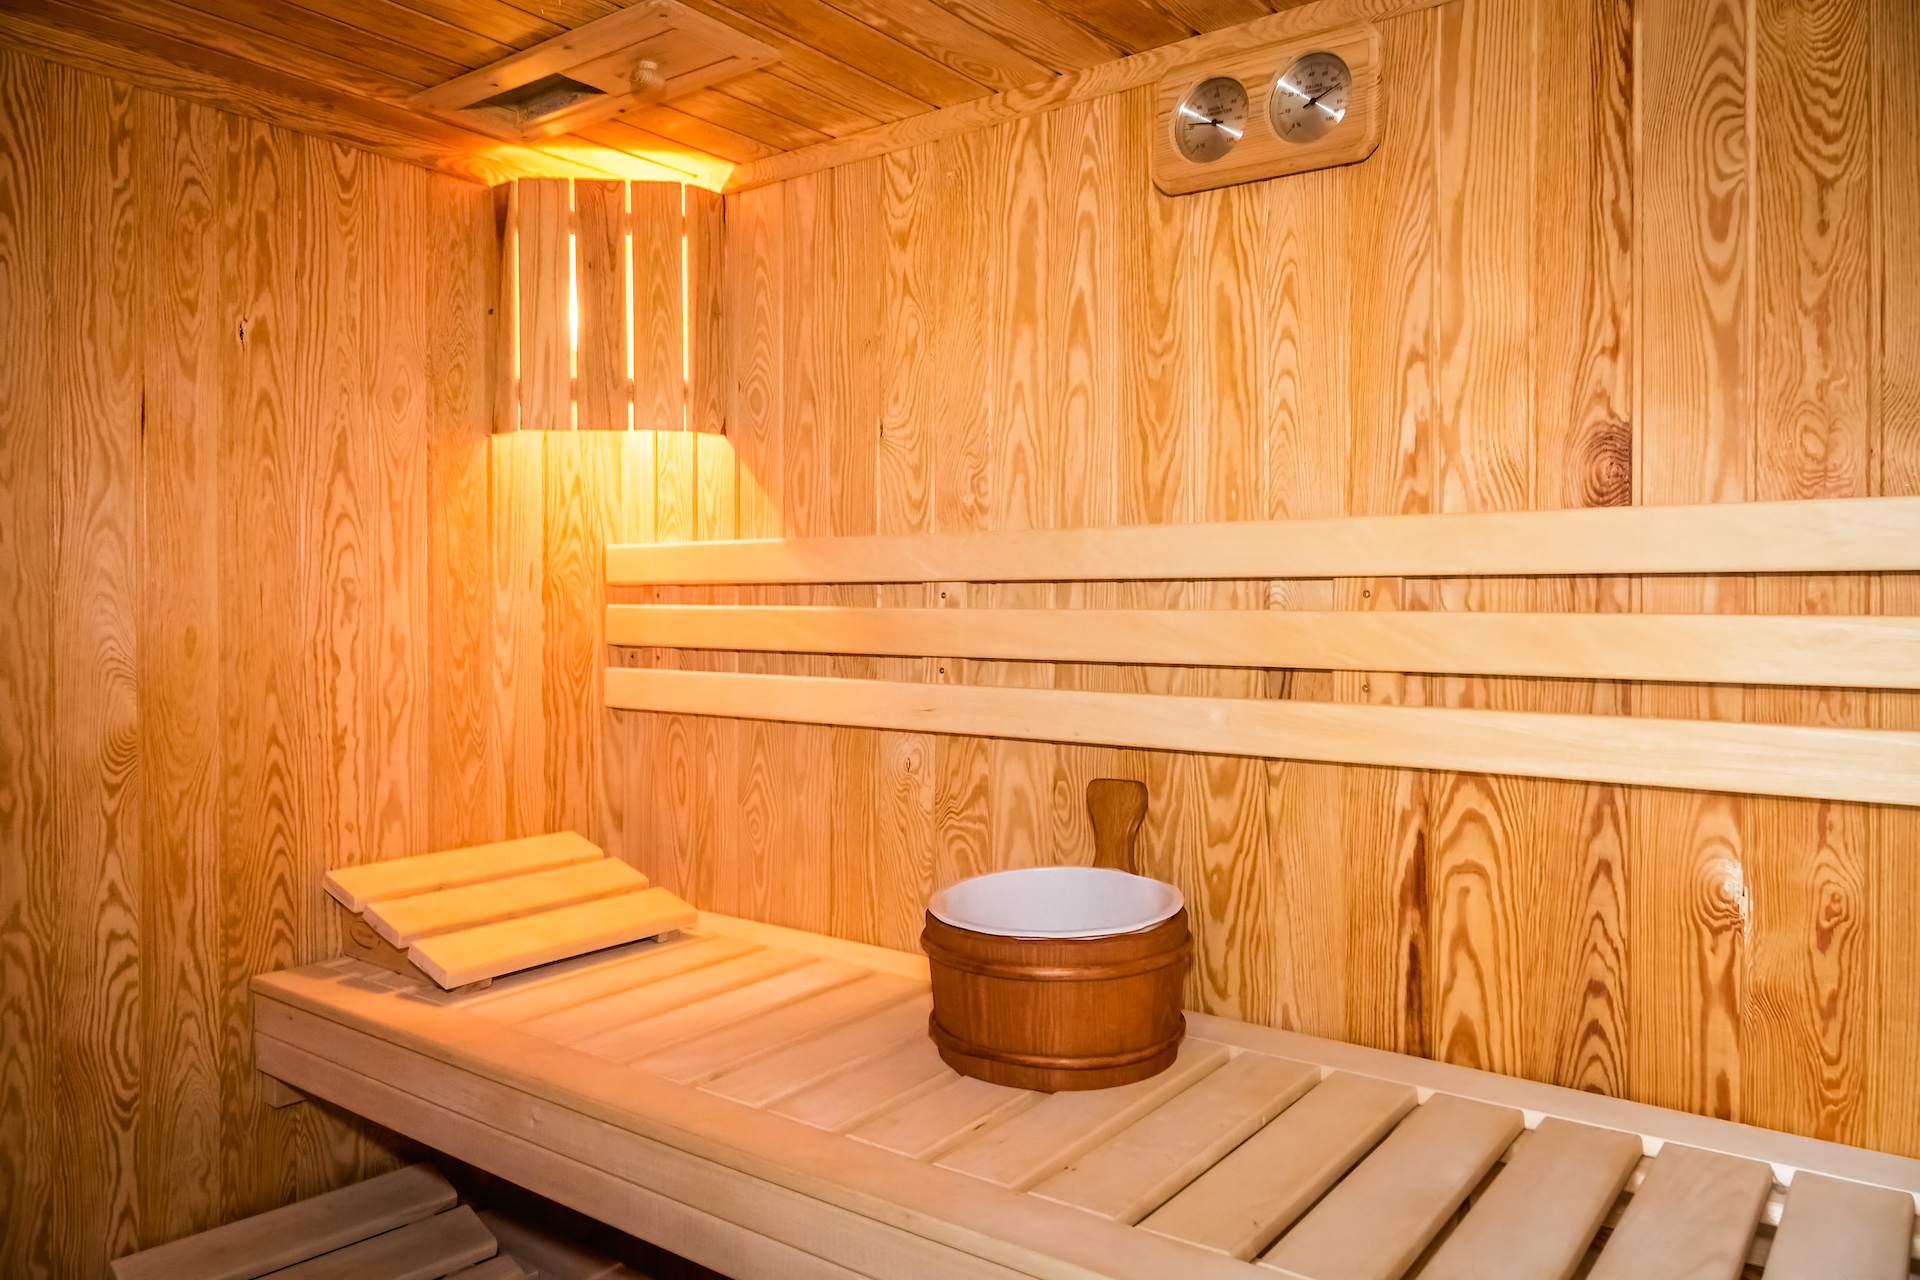 Interior of a wooden bed in a home sauna